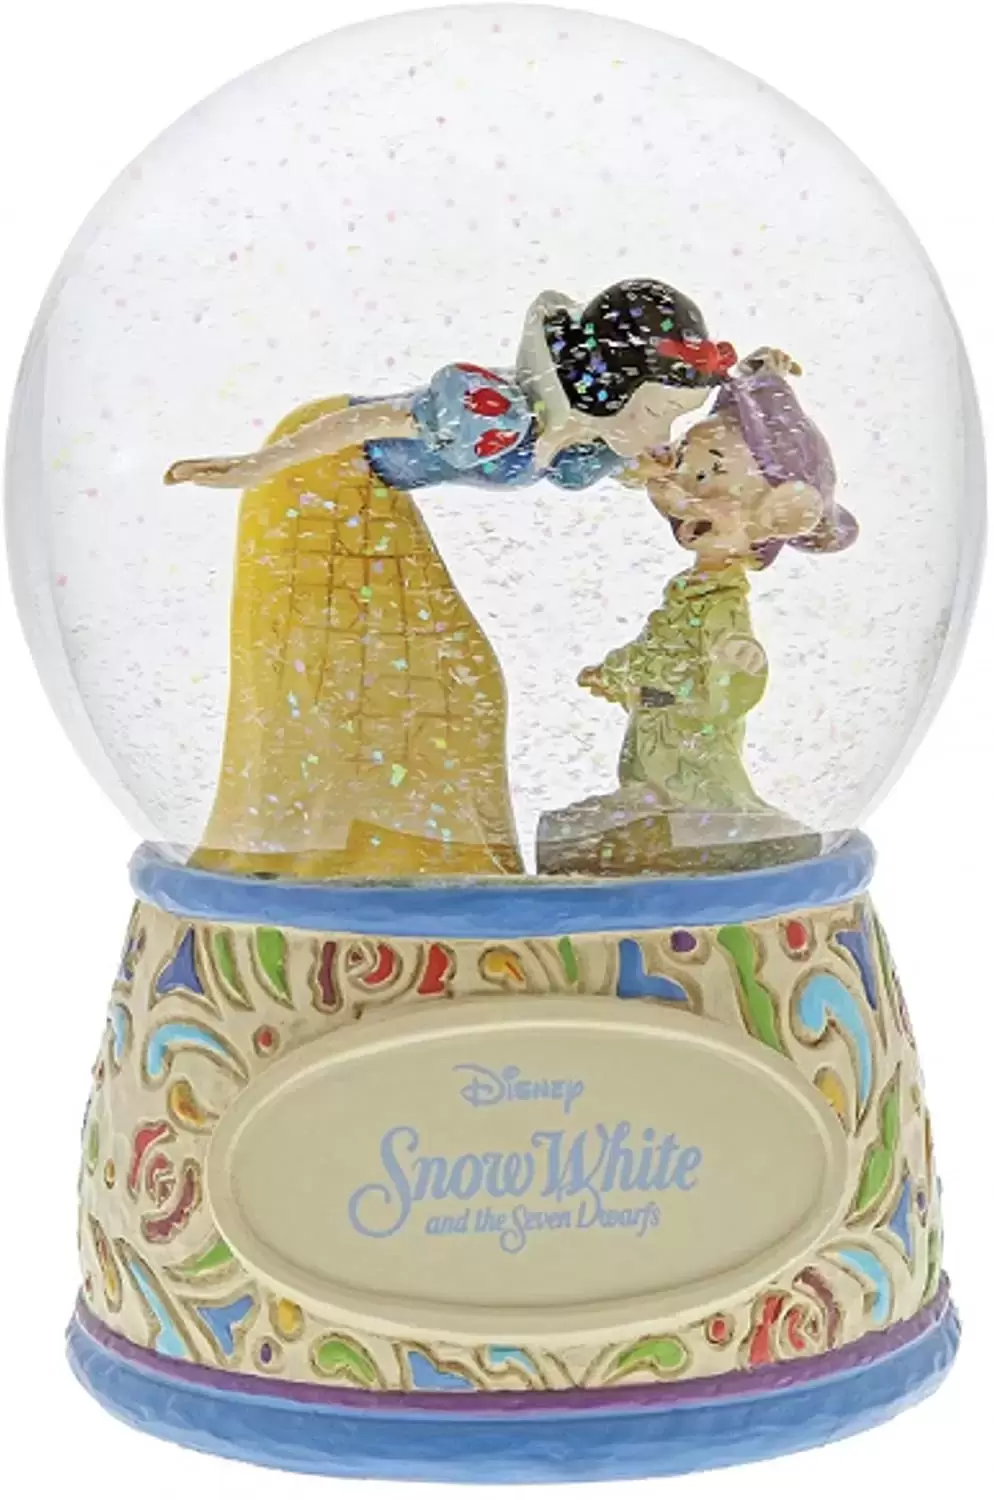 Disney Traditions by Jim Shore - Snow White and Dopey Waterball